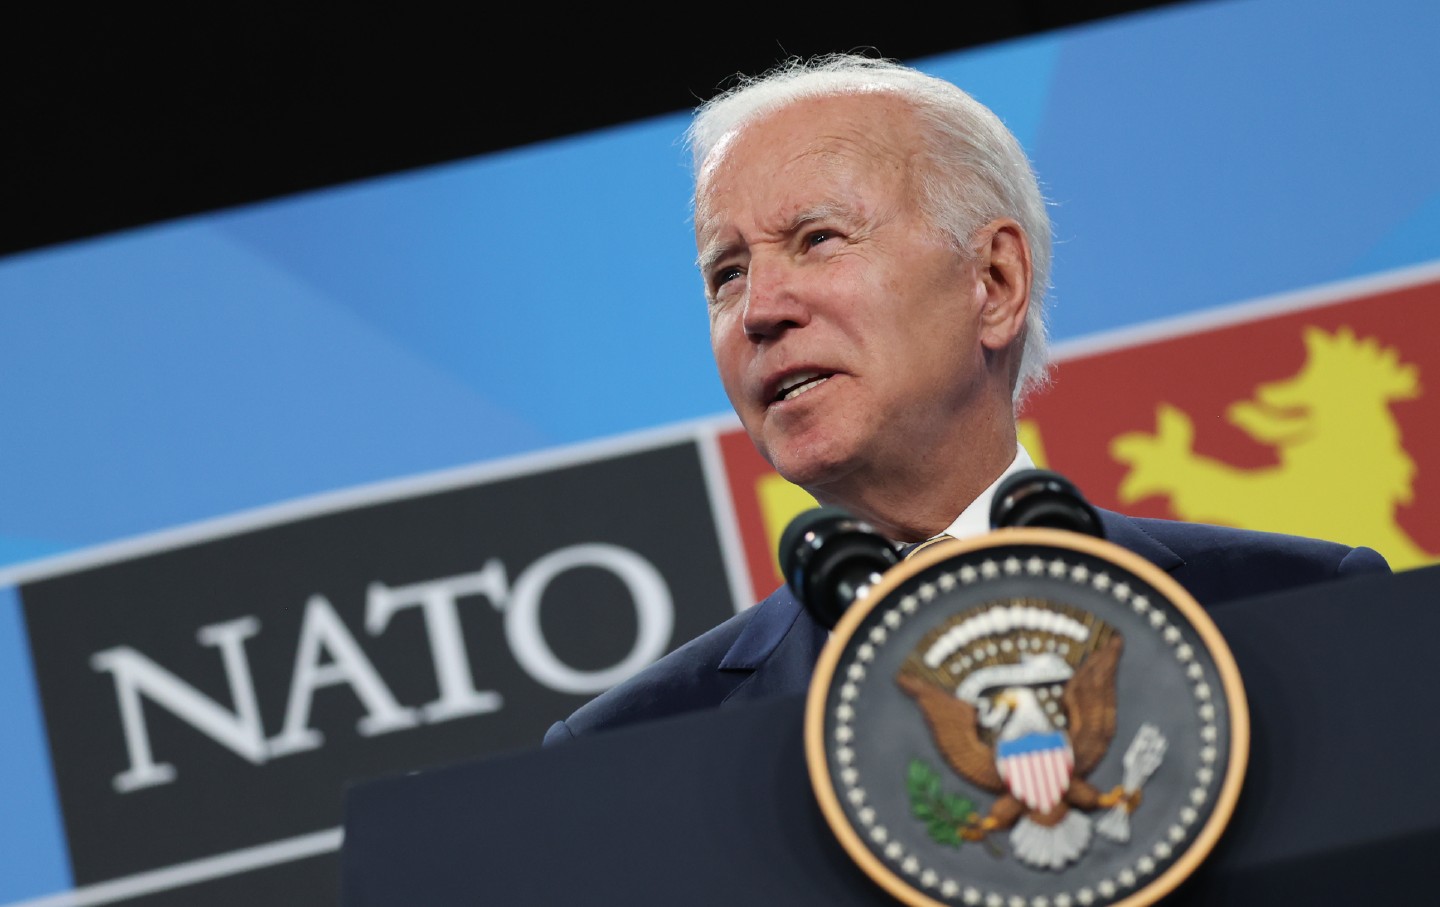 Joe Biden speaks during a press conference on the final day of the NATO Summit in Madrid, Spain, on June 30, 2022.